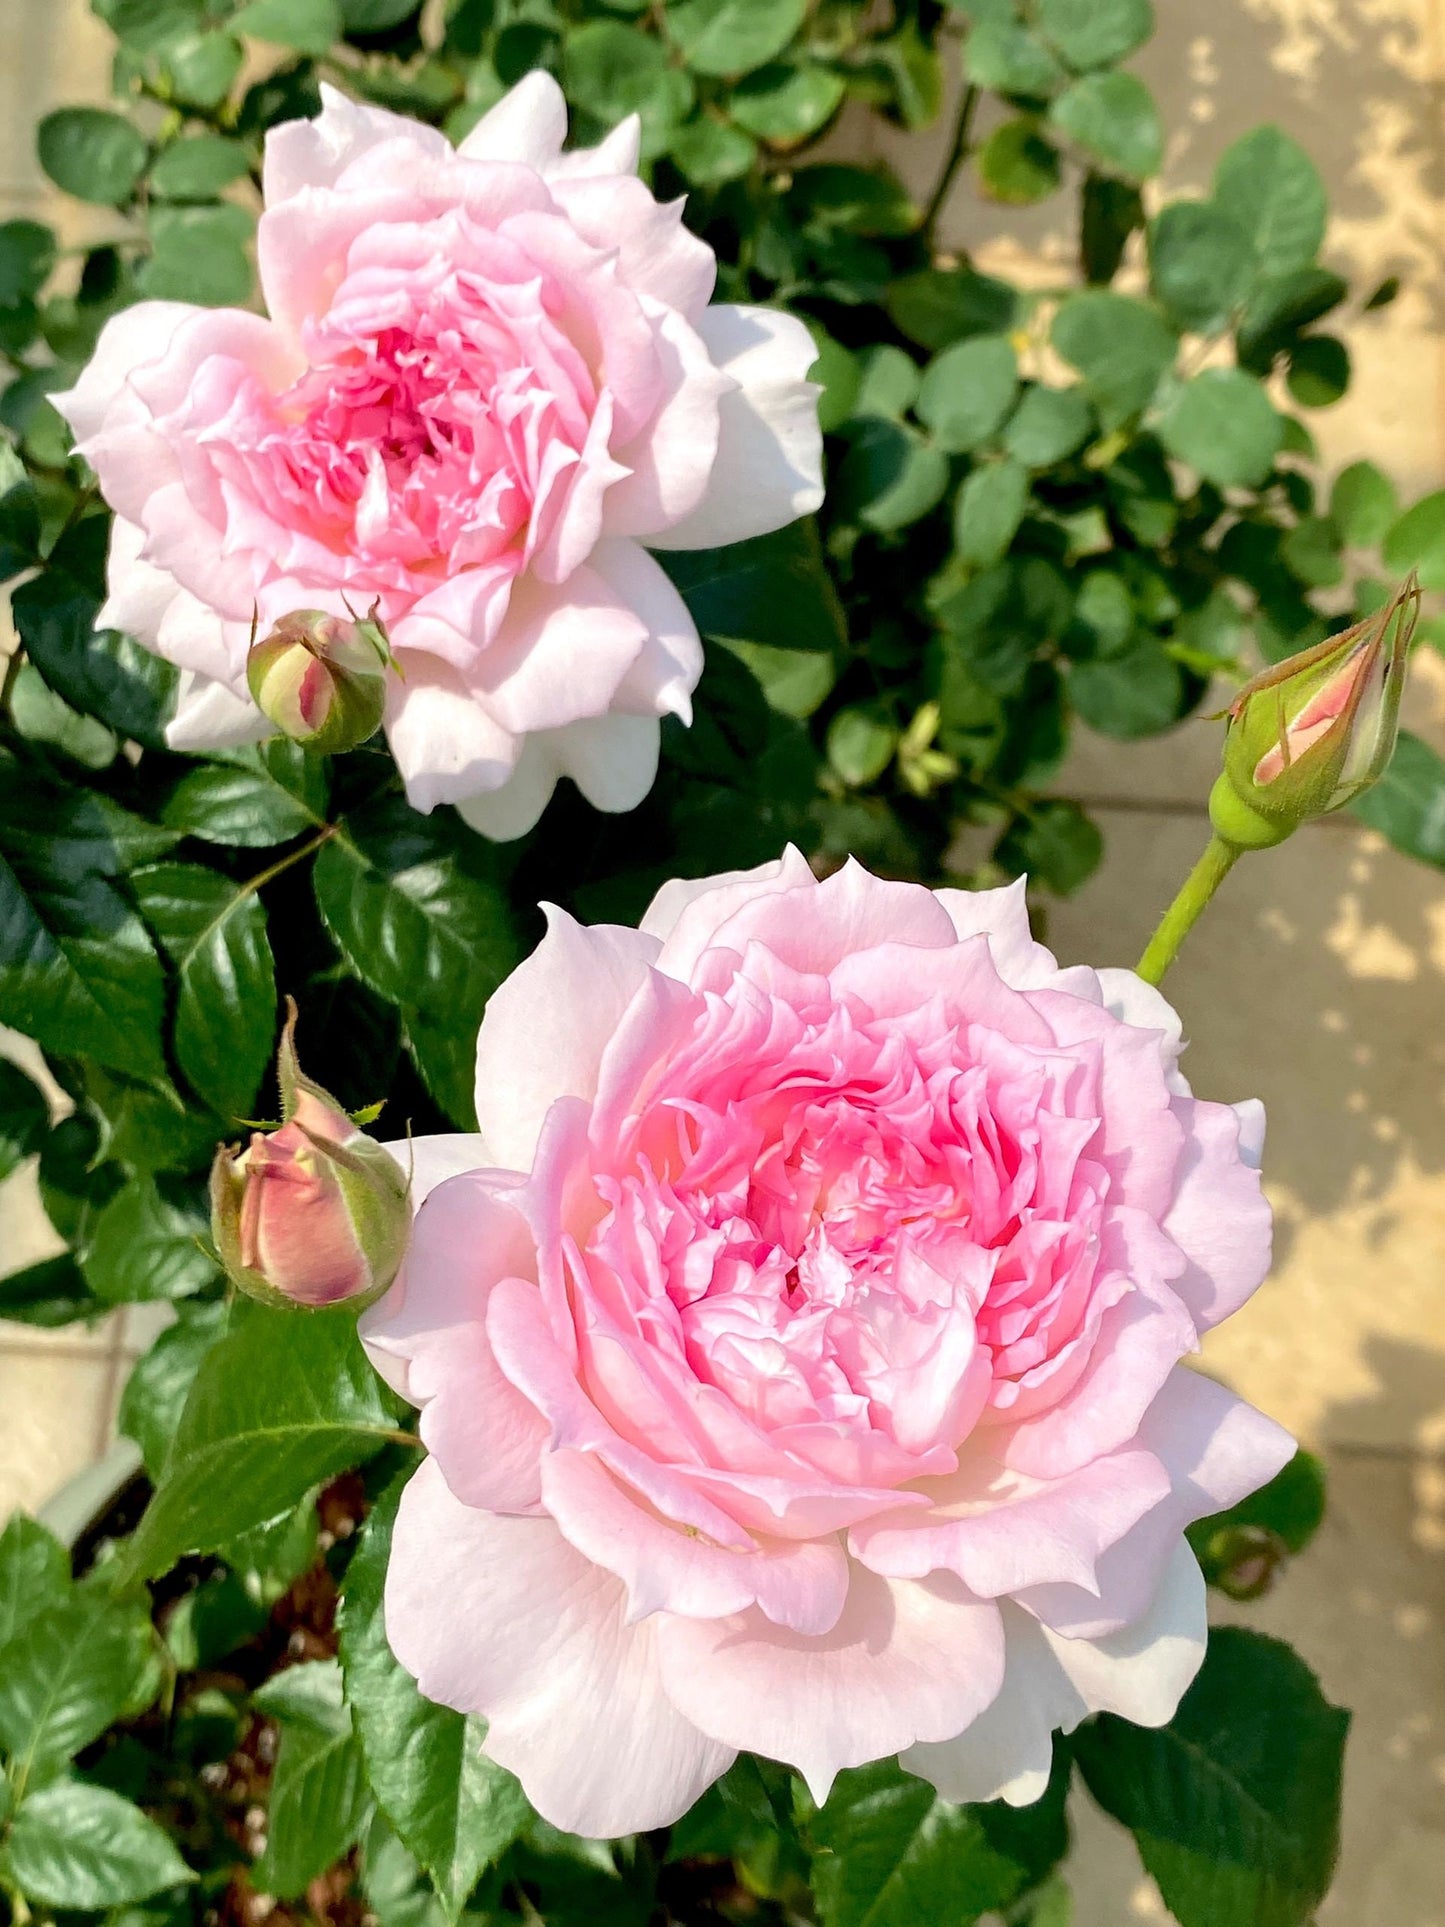 Rose【Ajourée |  アジュール】- 1.5 Gal Own Root Bare Root| Rare Japanese Rosa|  河本バラ園| Heat Resistant| Drought-Resistant| Intense Fragrance|镂空